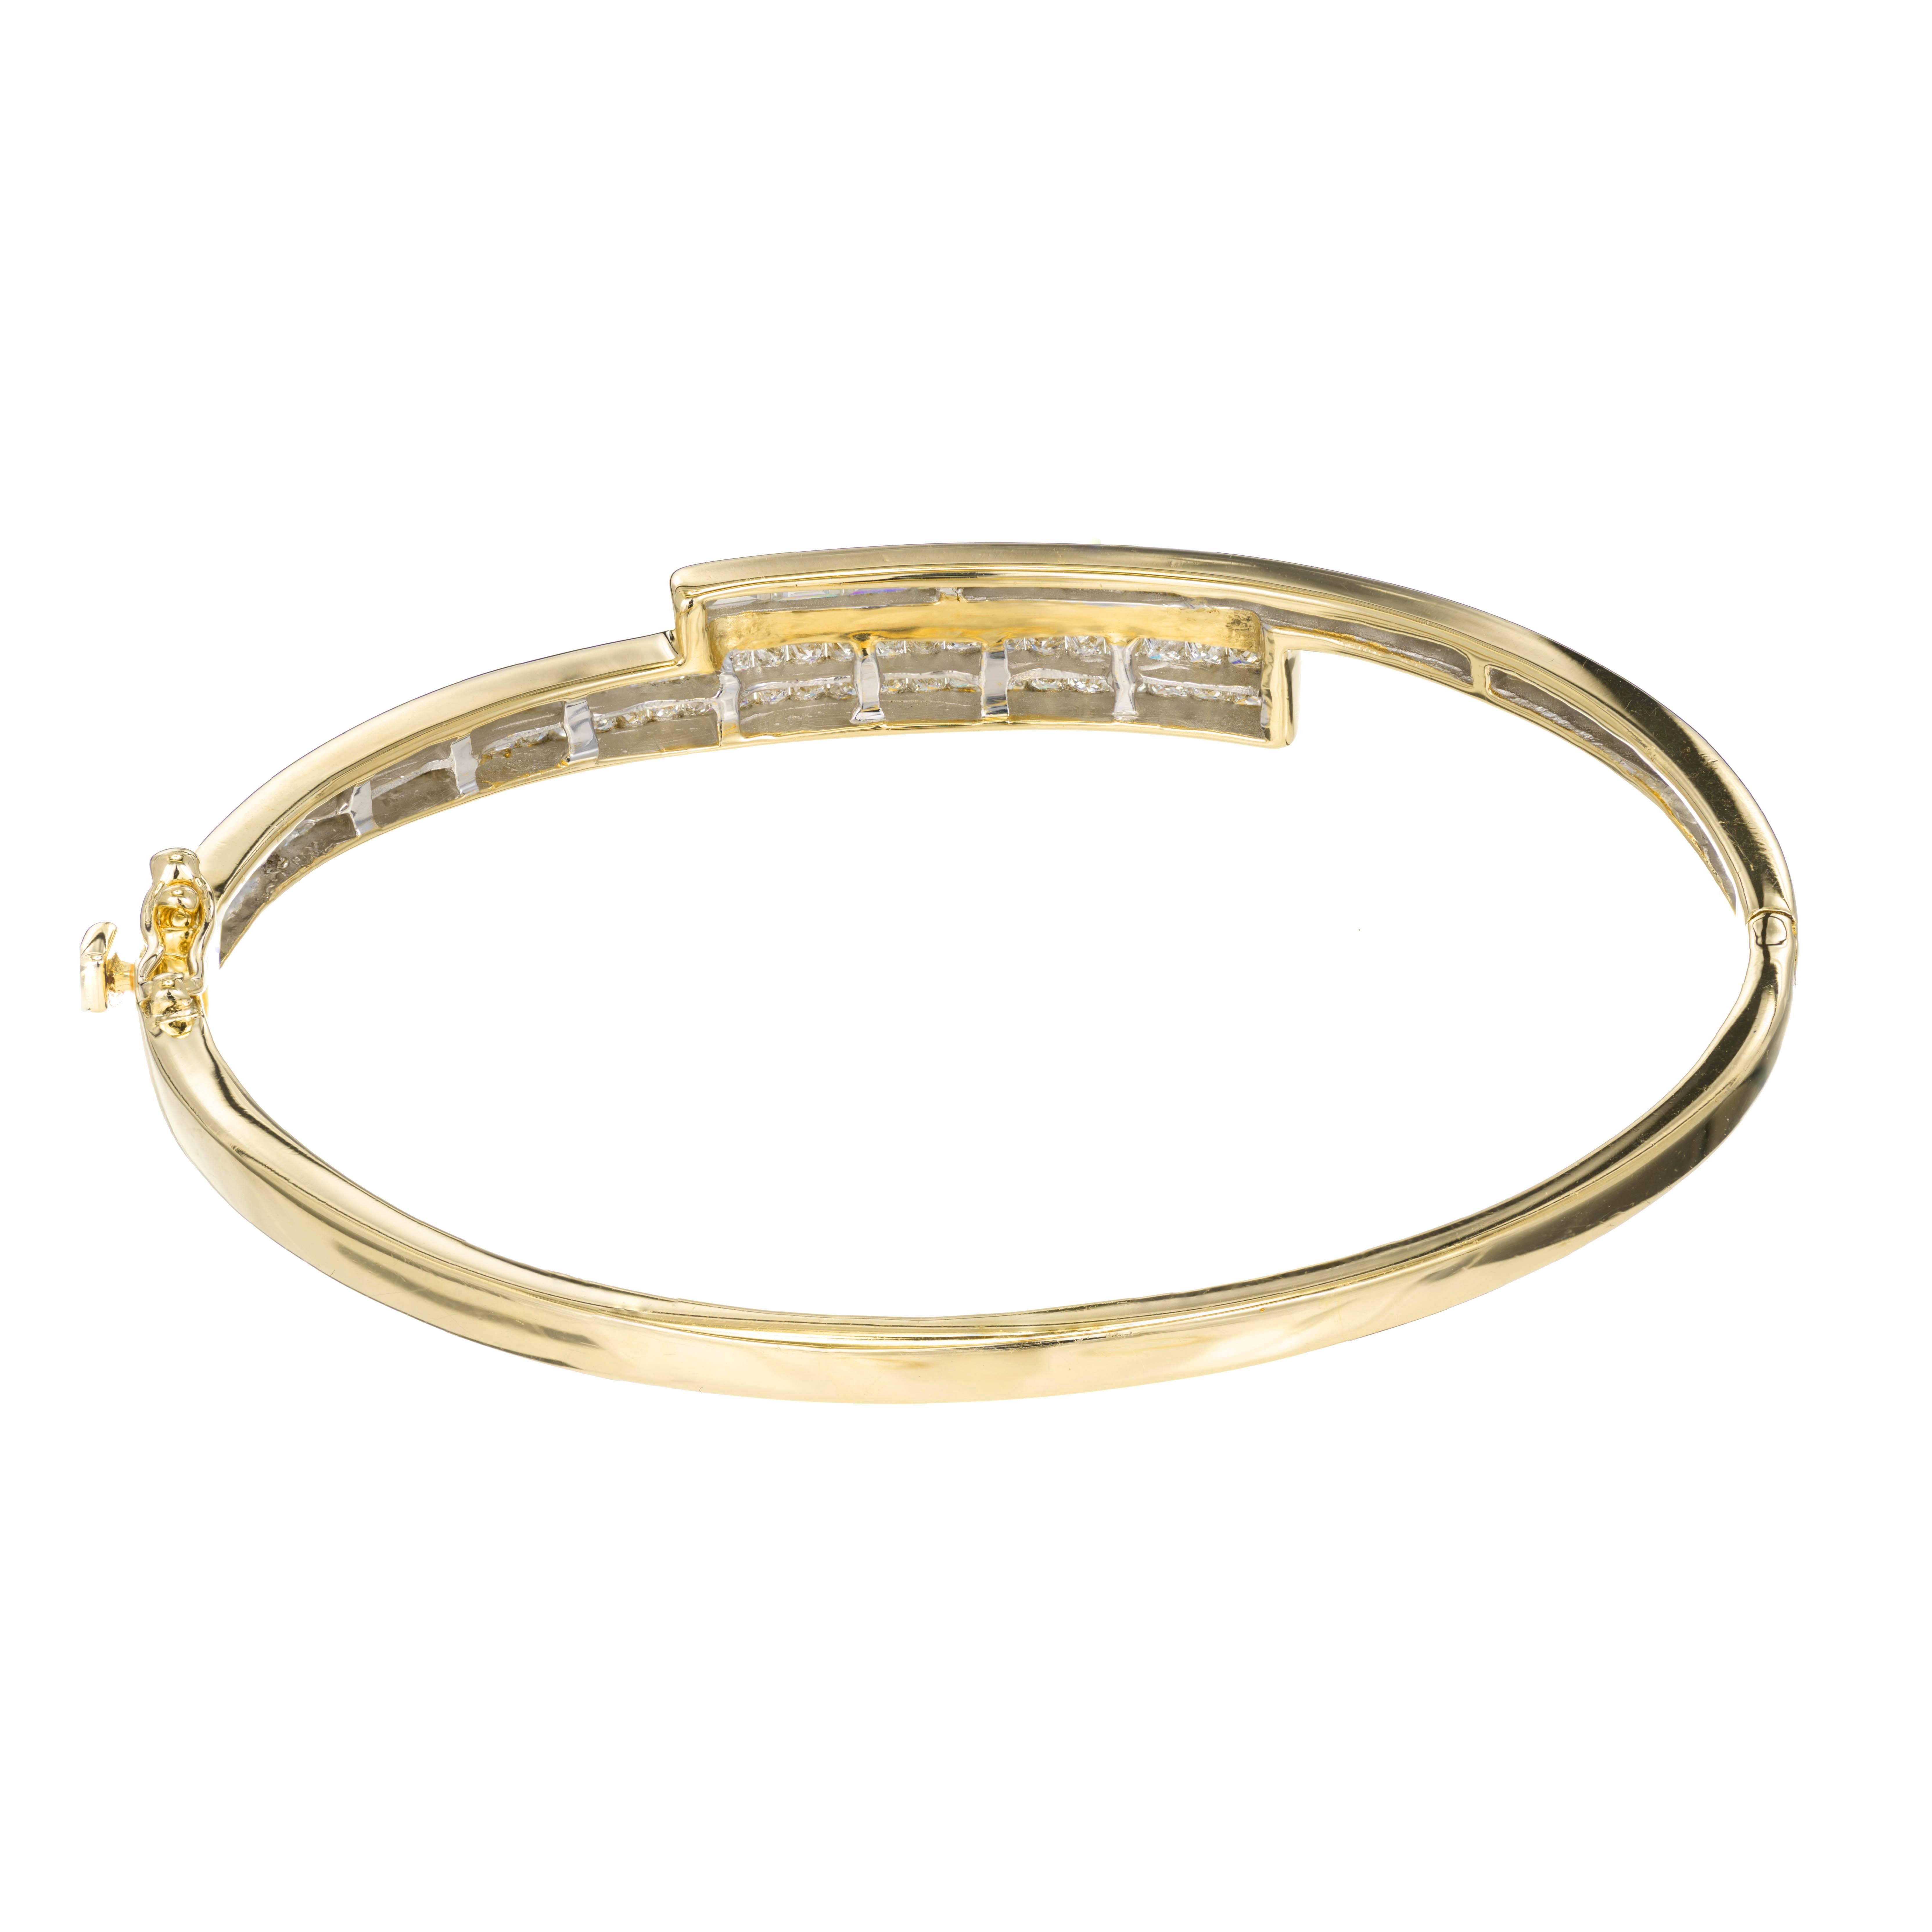 Hinged diamond by pass style bangle bracelet with bright sparkly diamonds. Set in 14k yellow gold with secure hinge and catch with side lock safety.

60 princess cut invisible set diamonds and 15 straight baguette cut diamonds. Color G to H Clarity